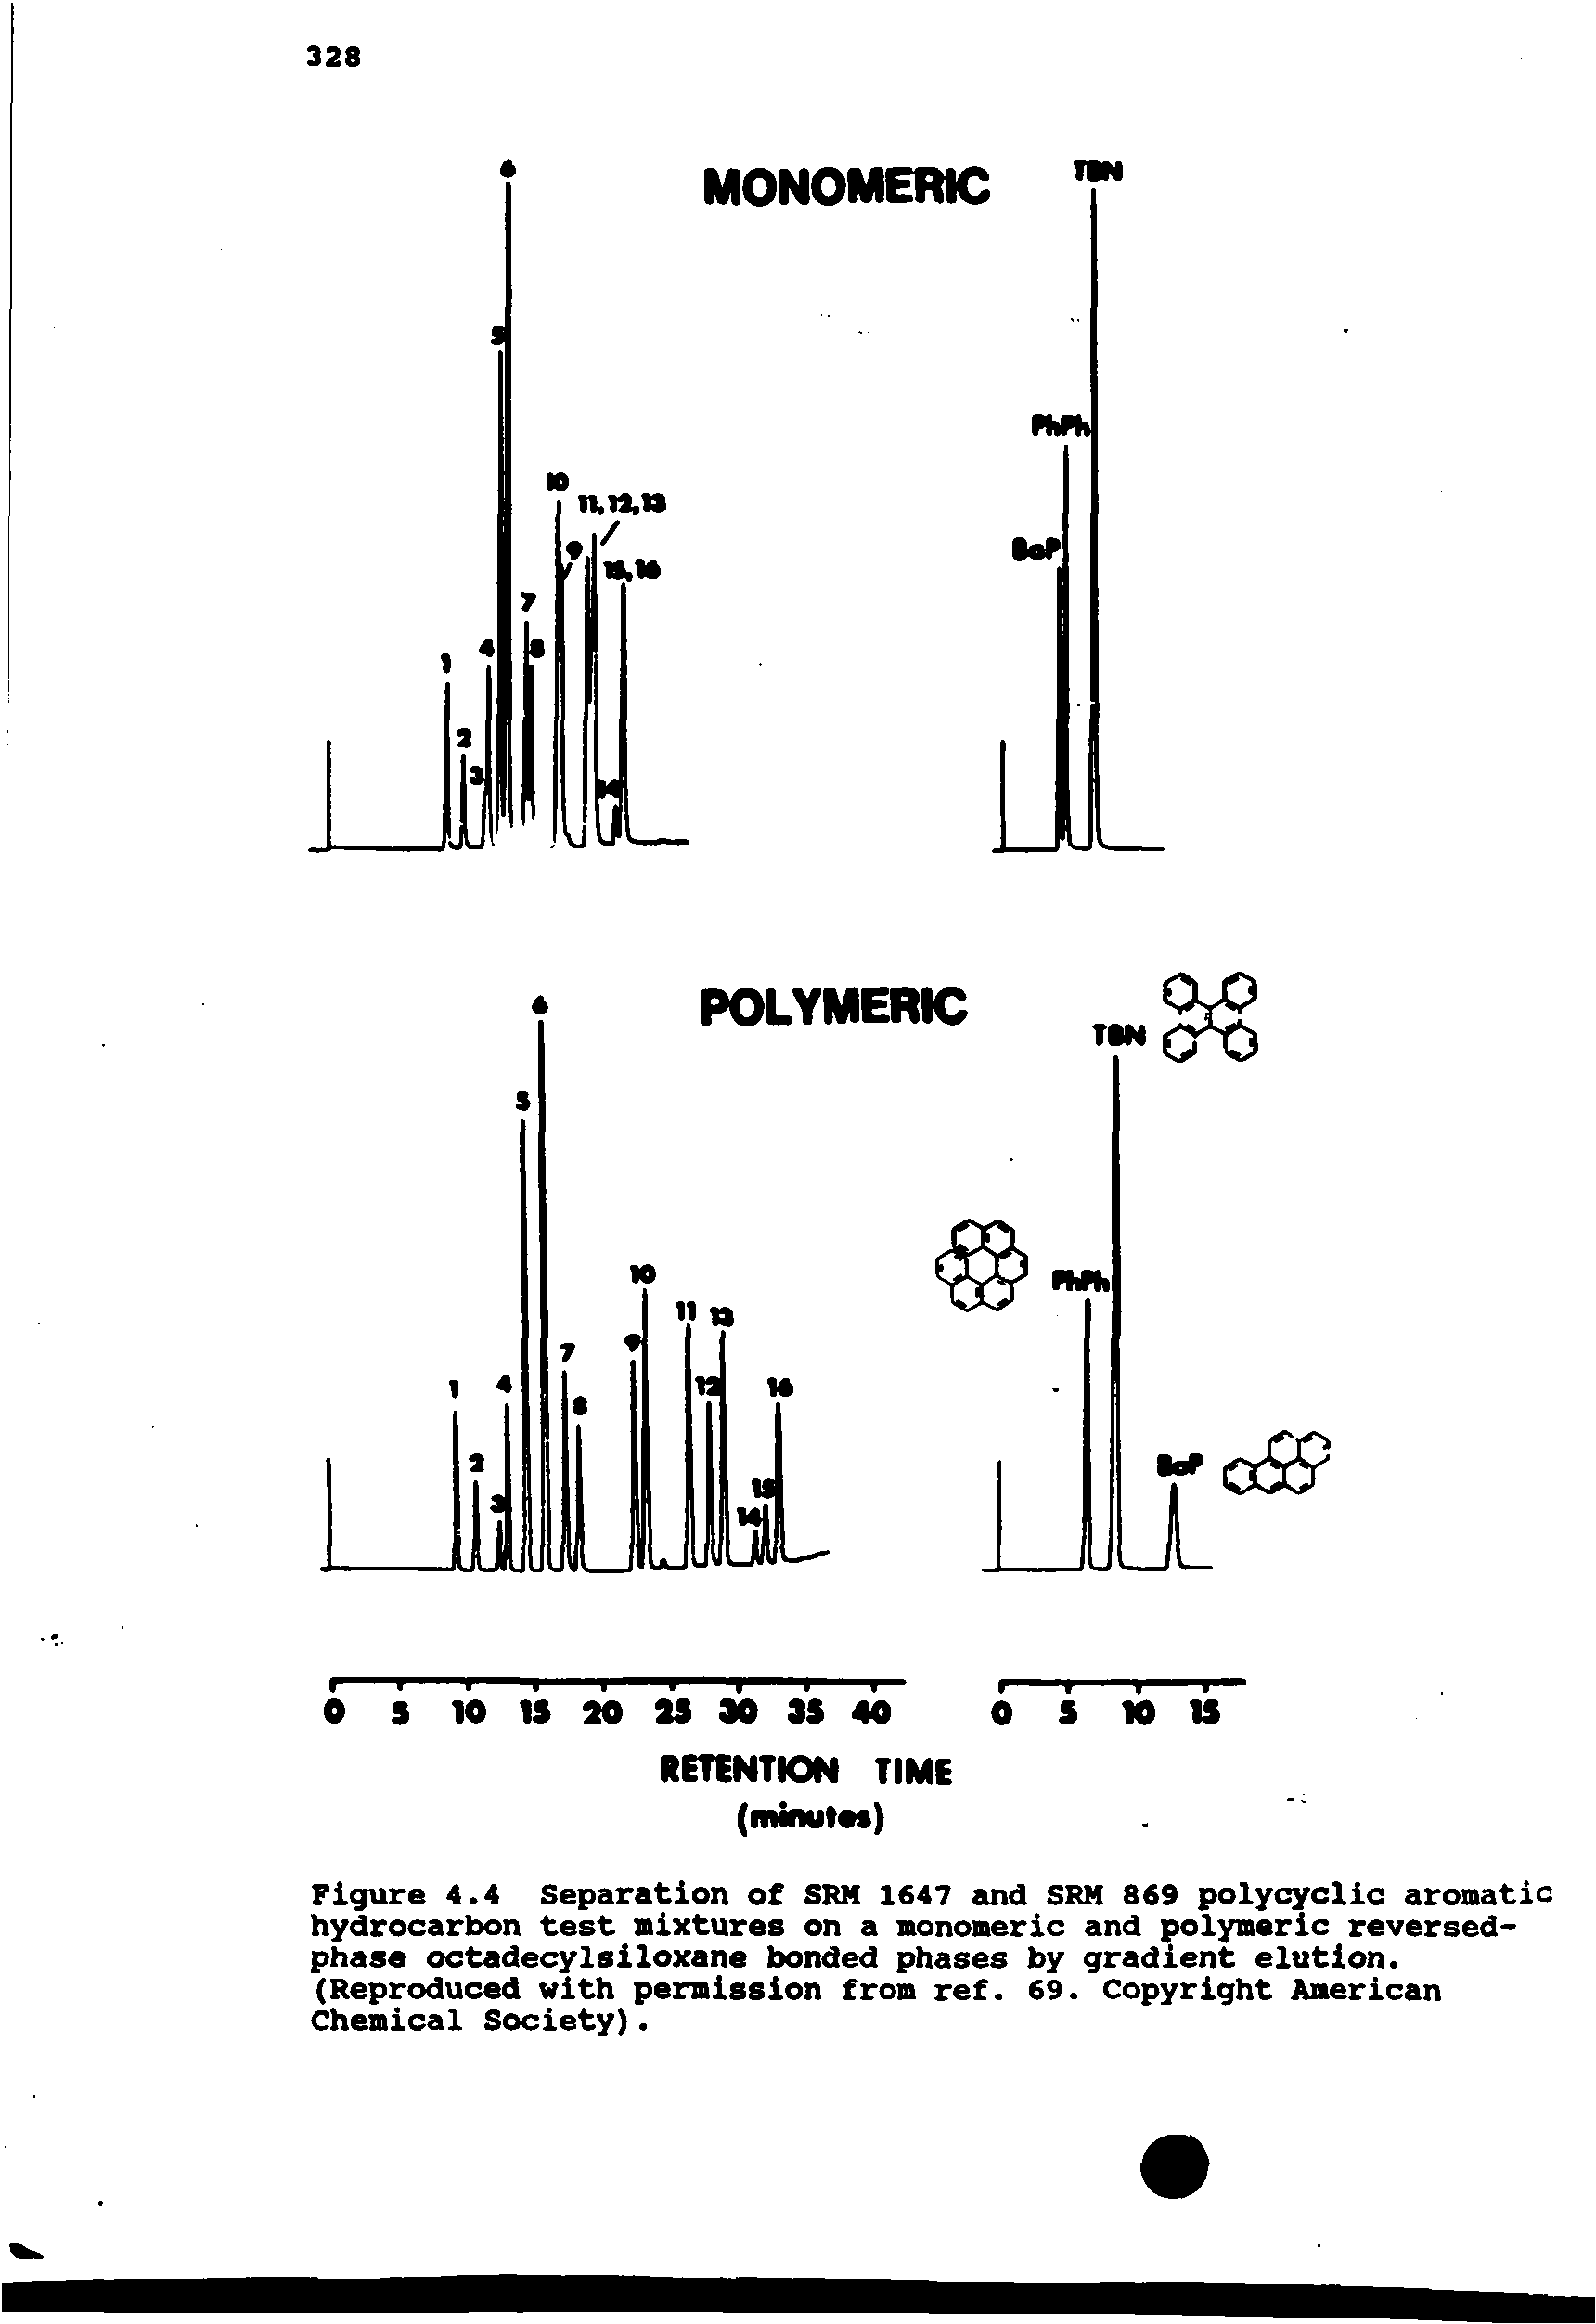 Figure 4.4 Separation of SRM 1647 and SRH 869 polycyclic aromatic hydrocarbon test mixtures on a monomeric and polymeric reversed-phase octadecylsiloxane bonded phases by gradient elution. (Reproduced with permission from ref. 69. Copyright American Chemical Society).